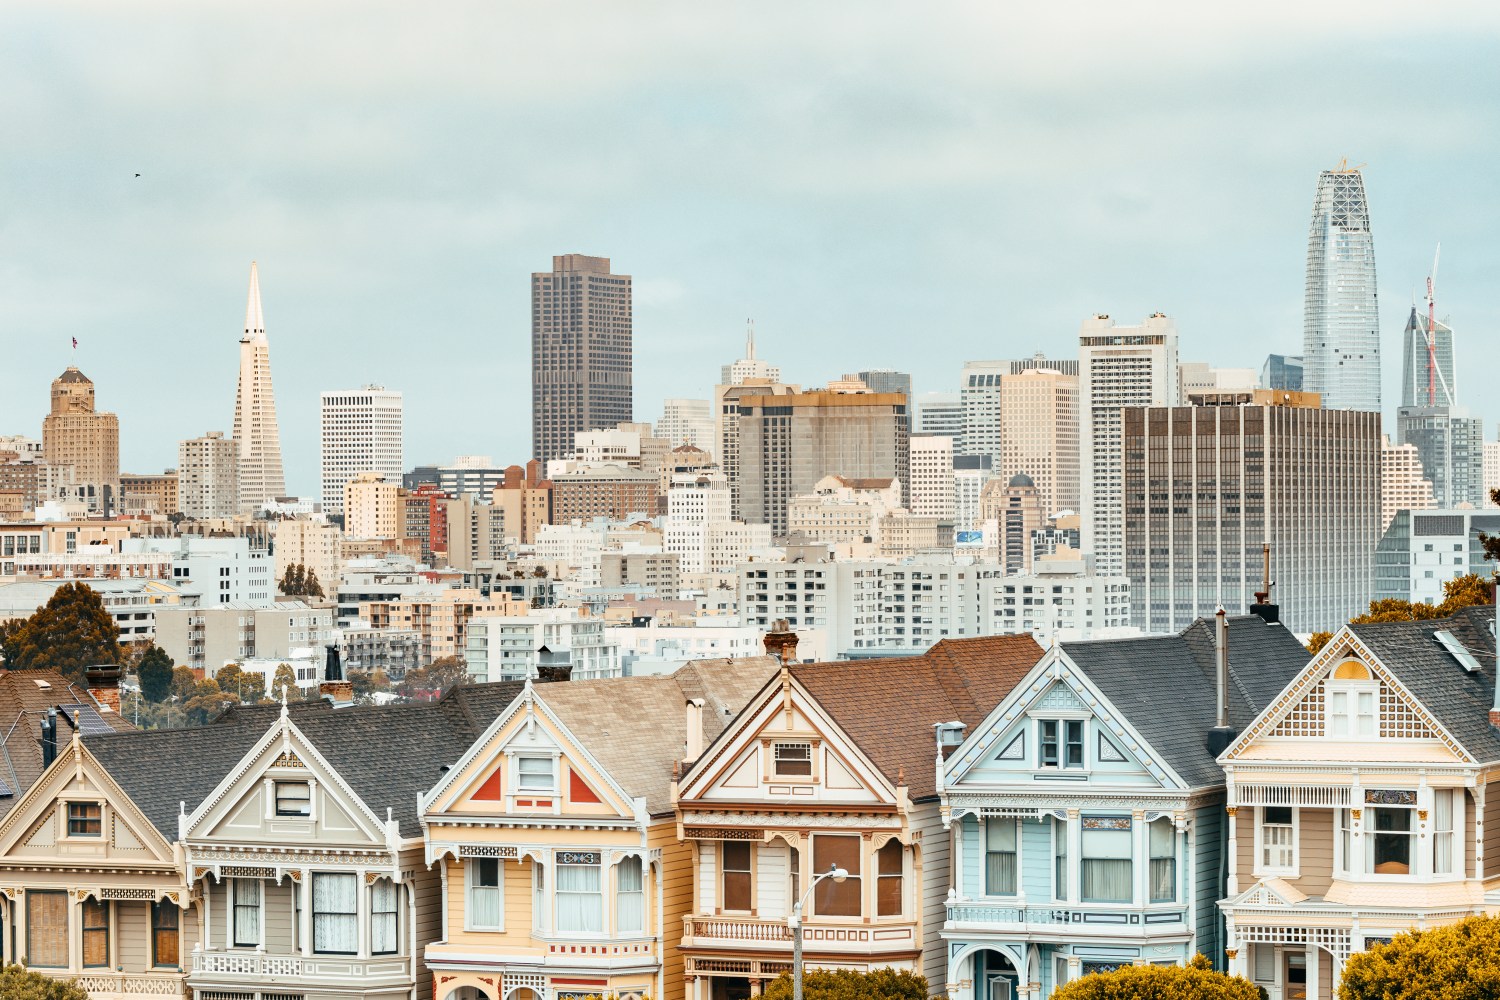 painted ladies victorian houses and san francisco skyline at background